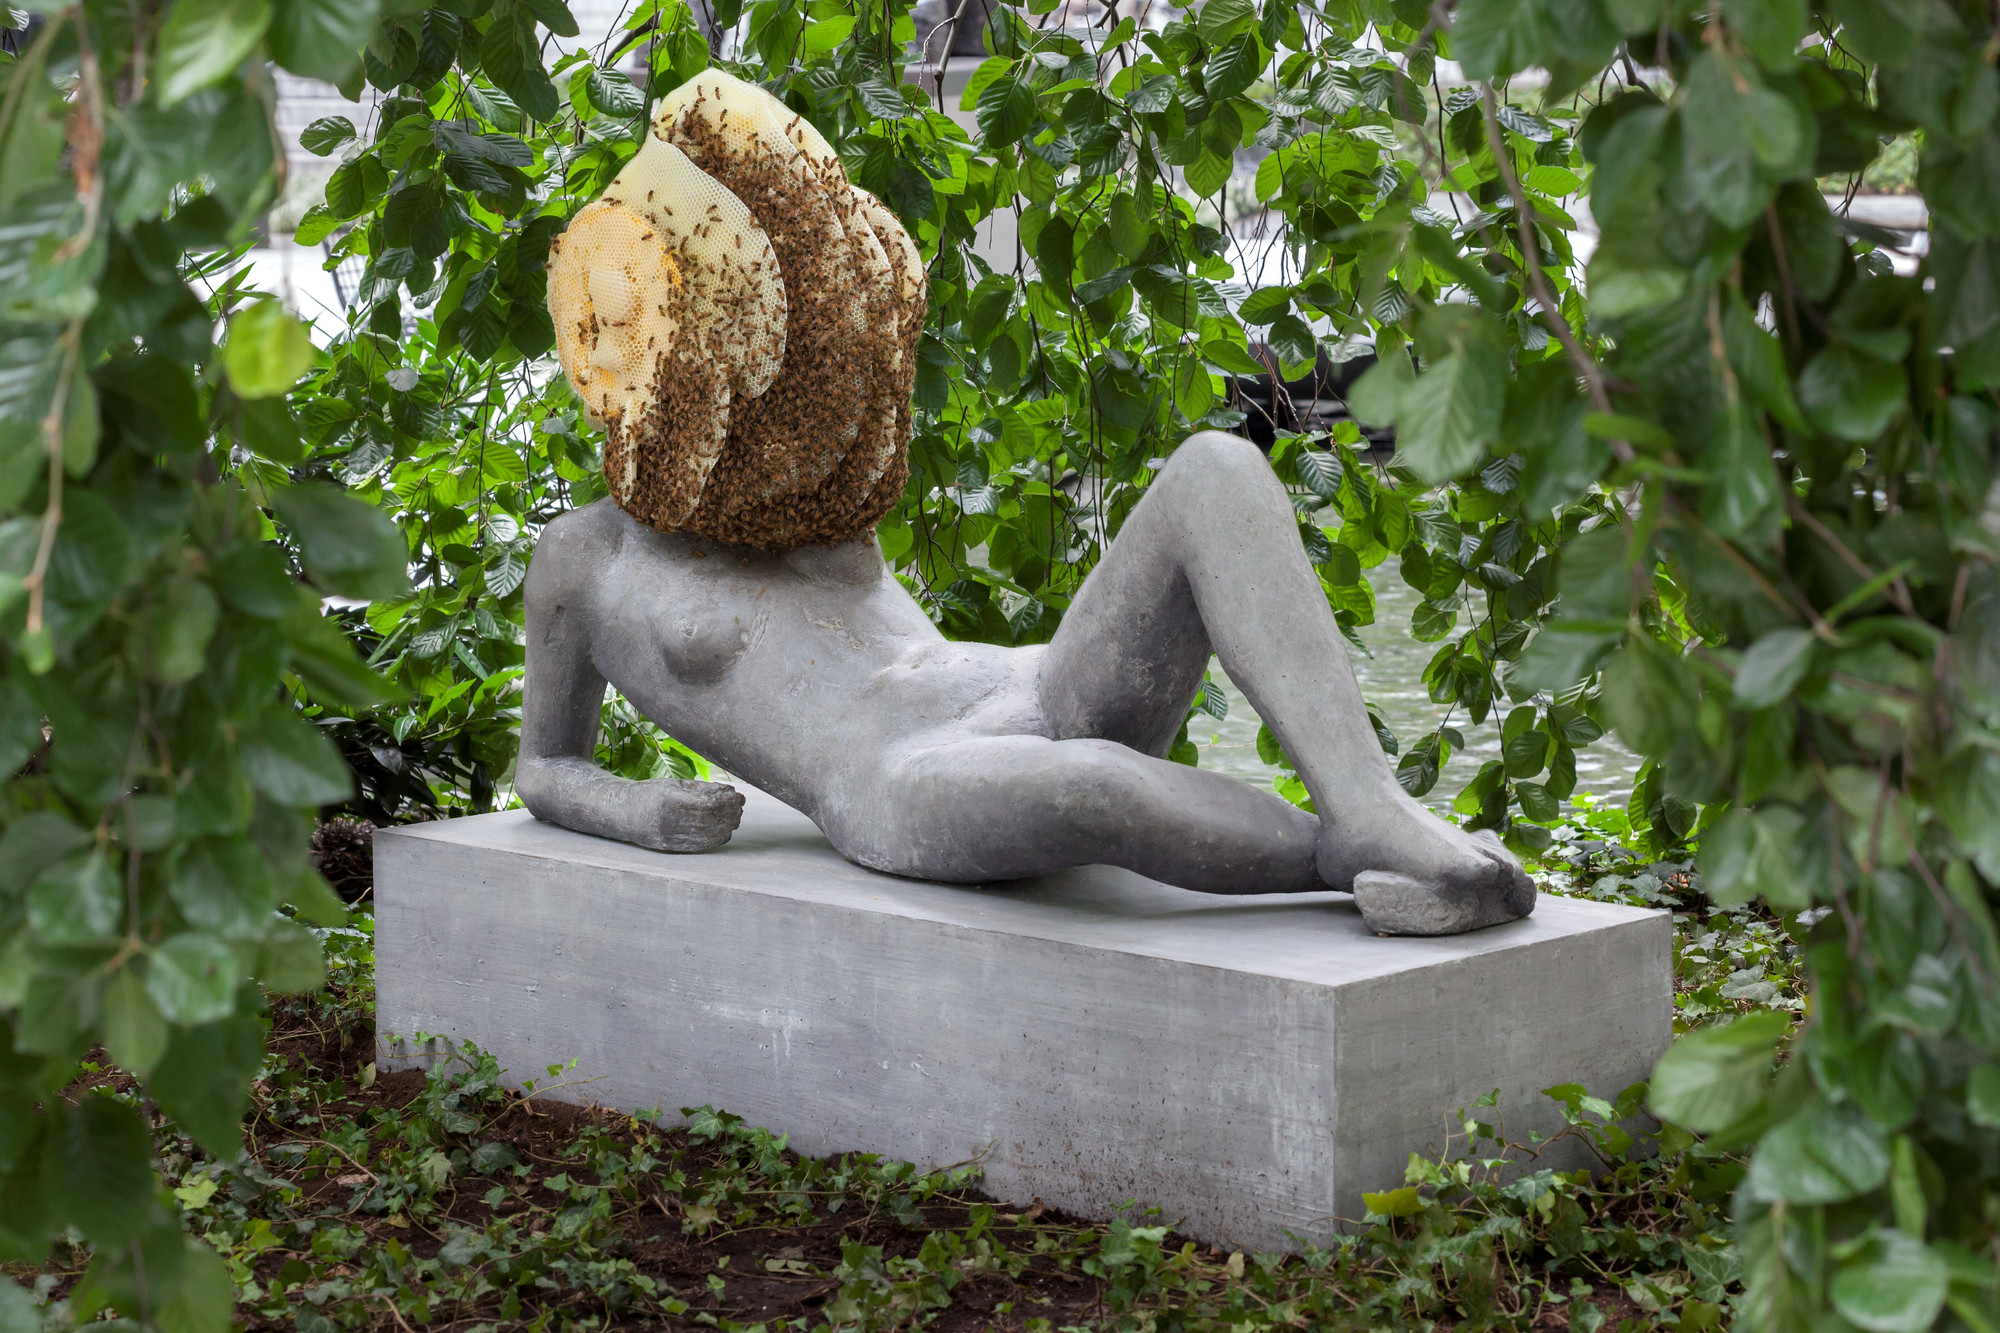 A stone statue of a nude reclining woman; in place of a head is a large, active bees nest.